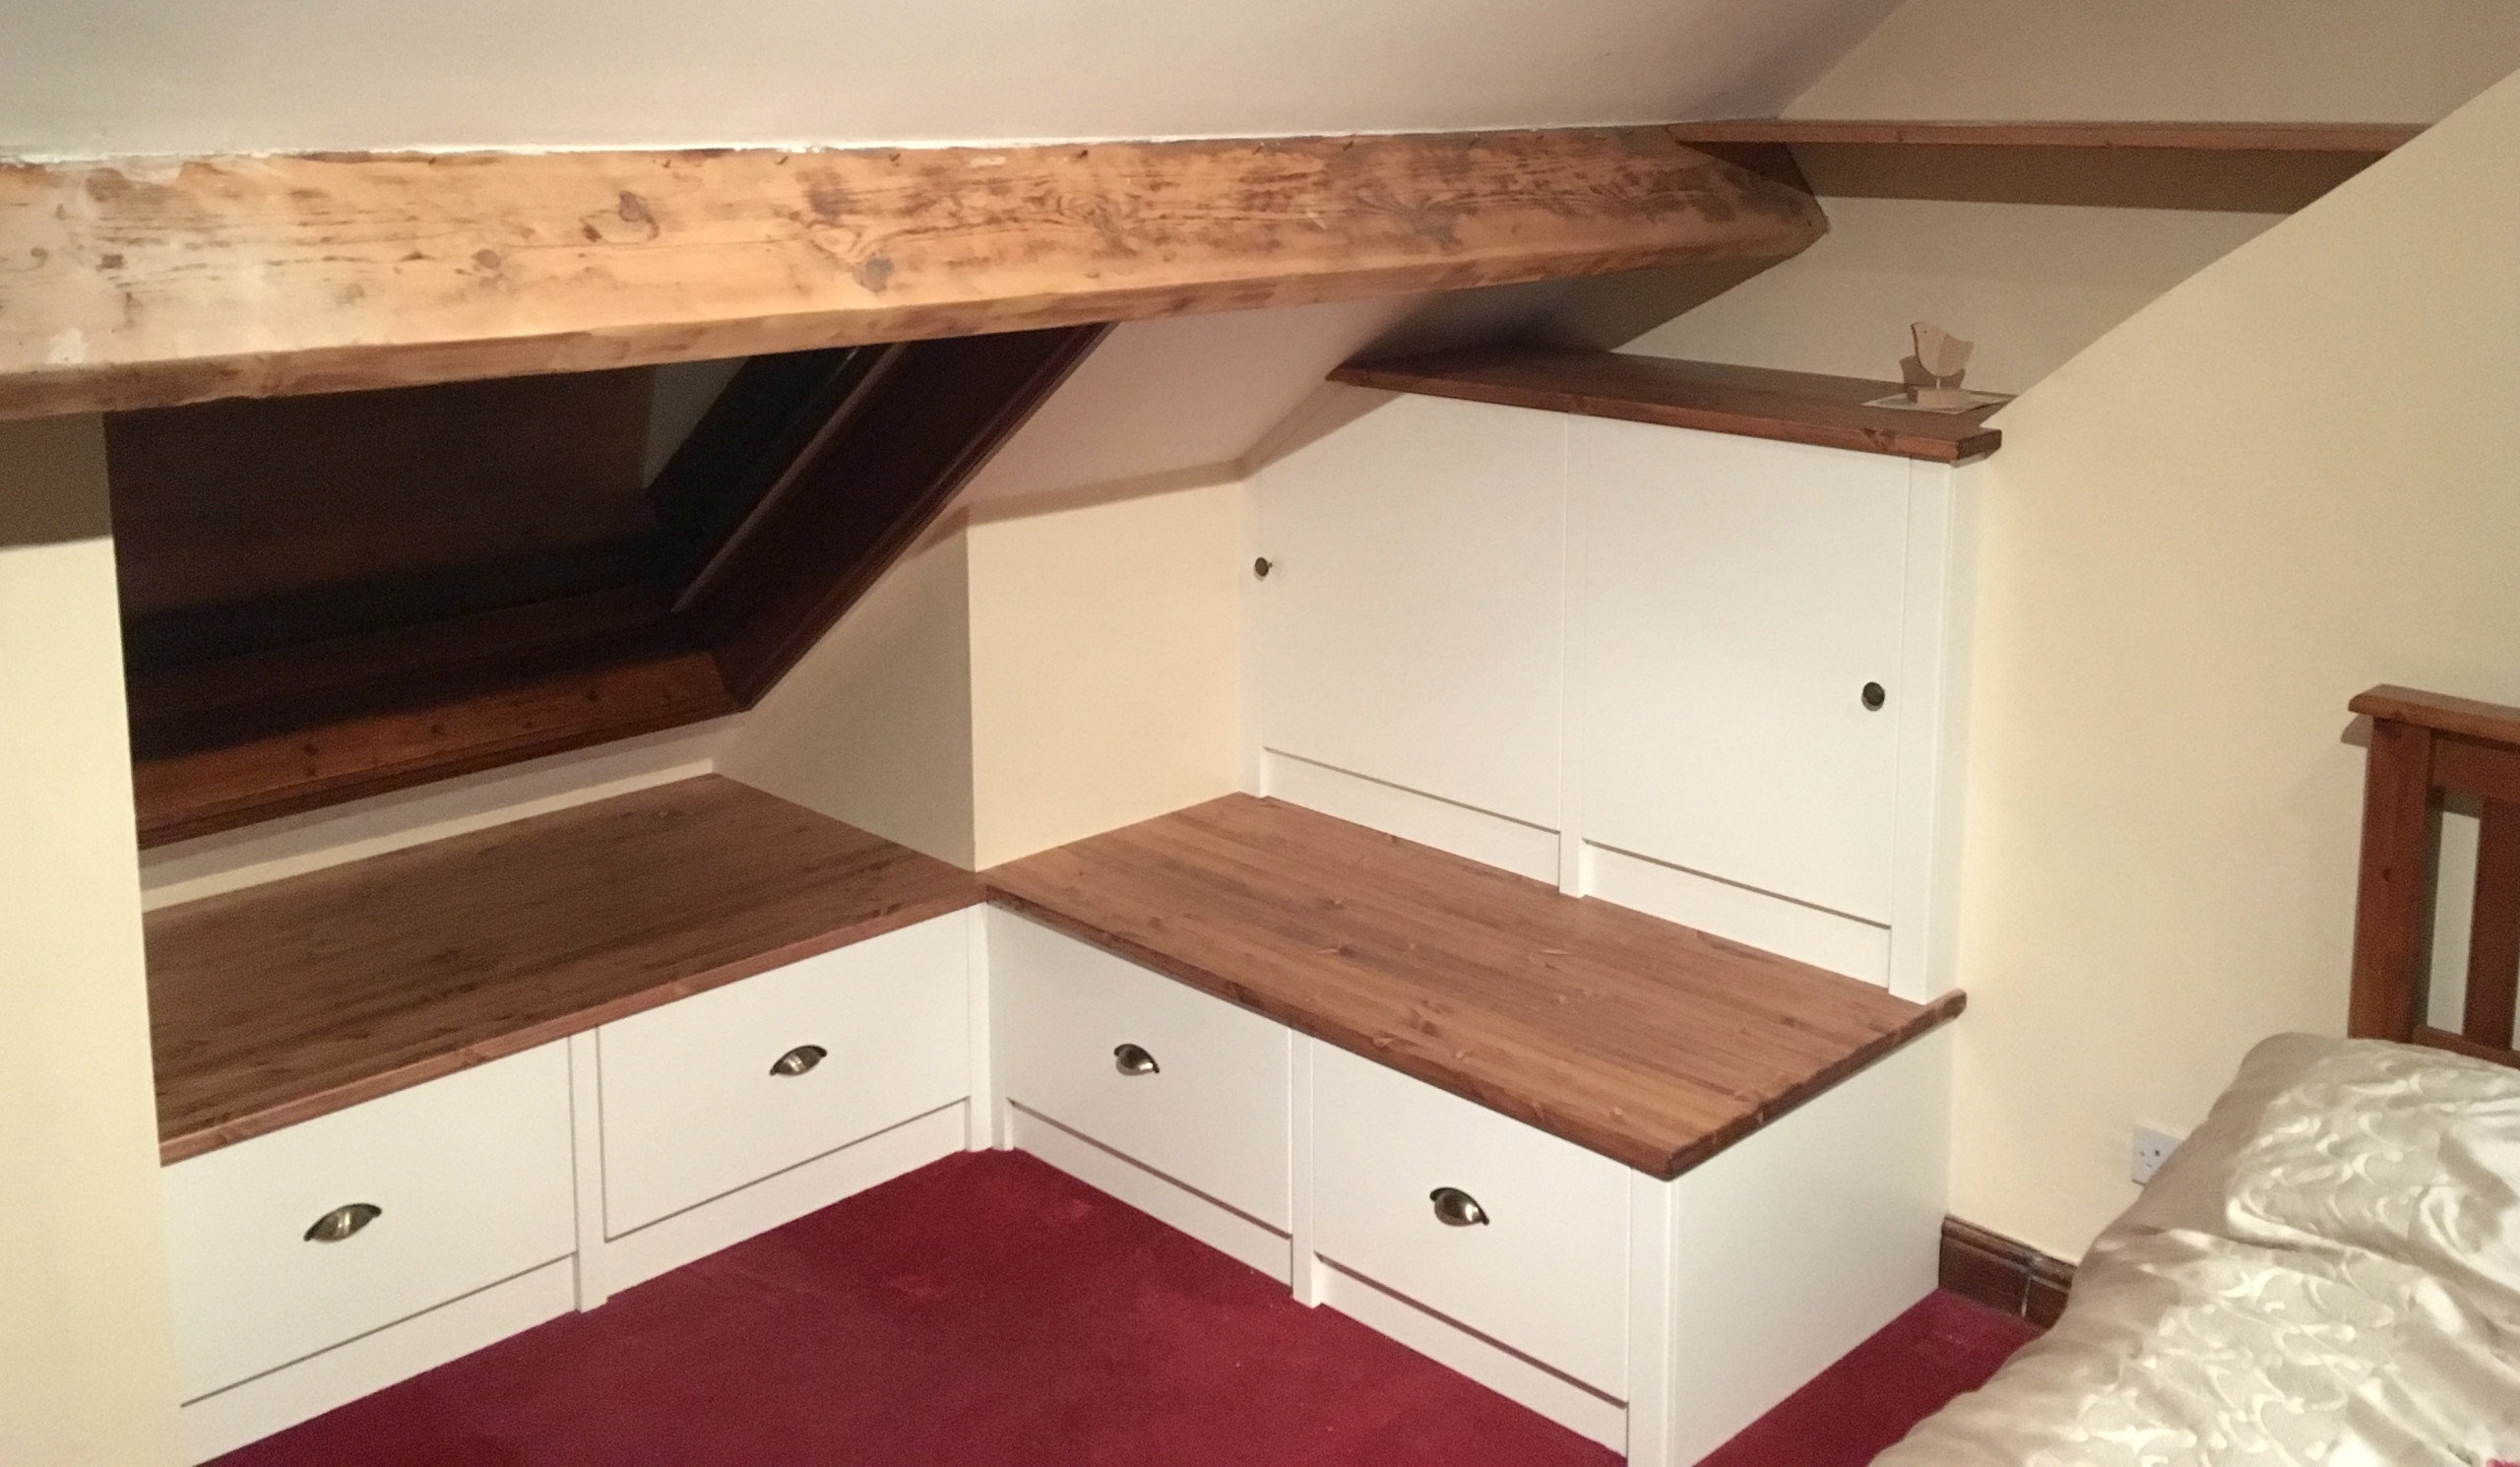 Very bespoke problem solving storage for am unusual attic space.